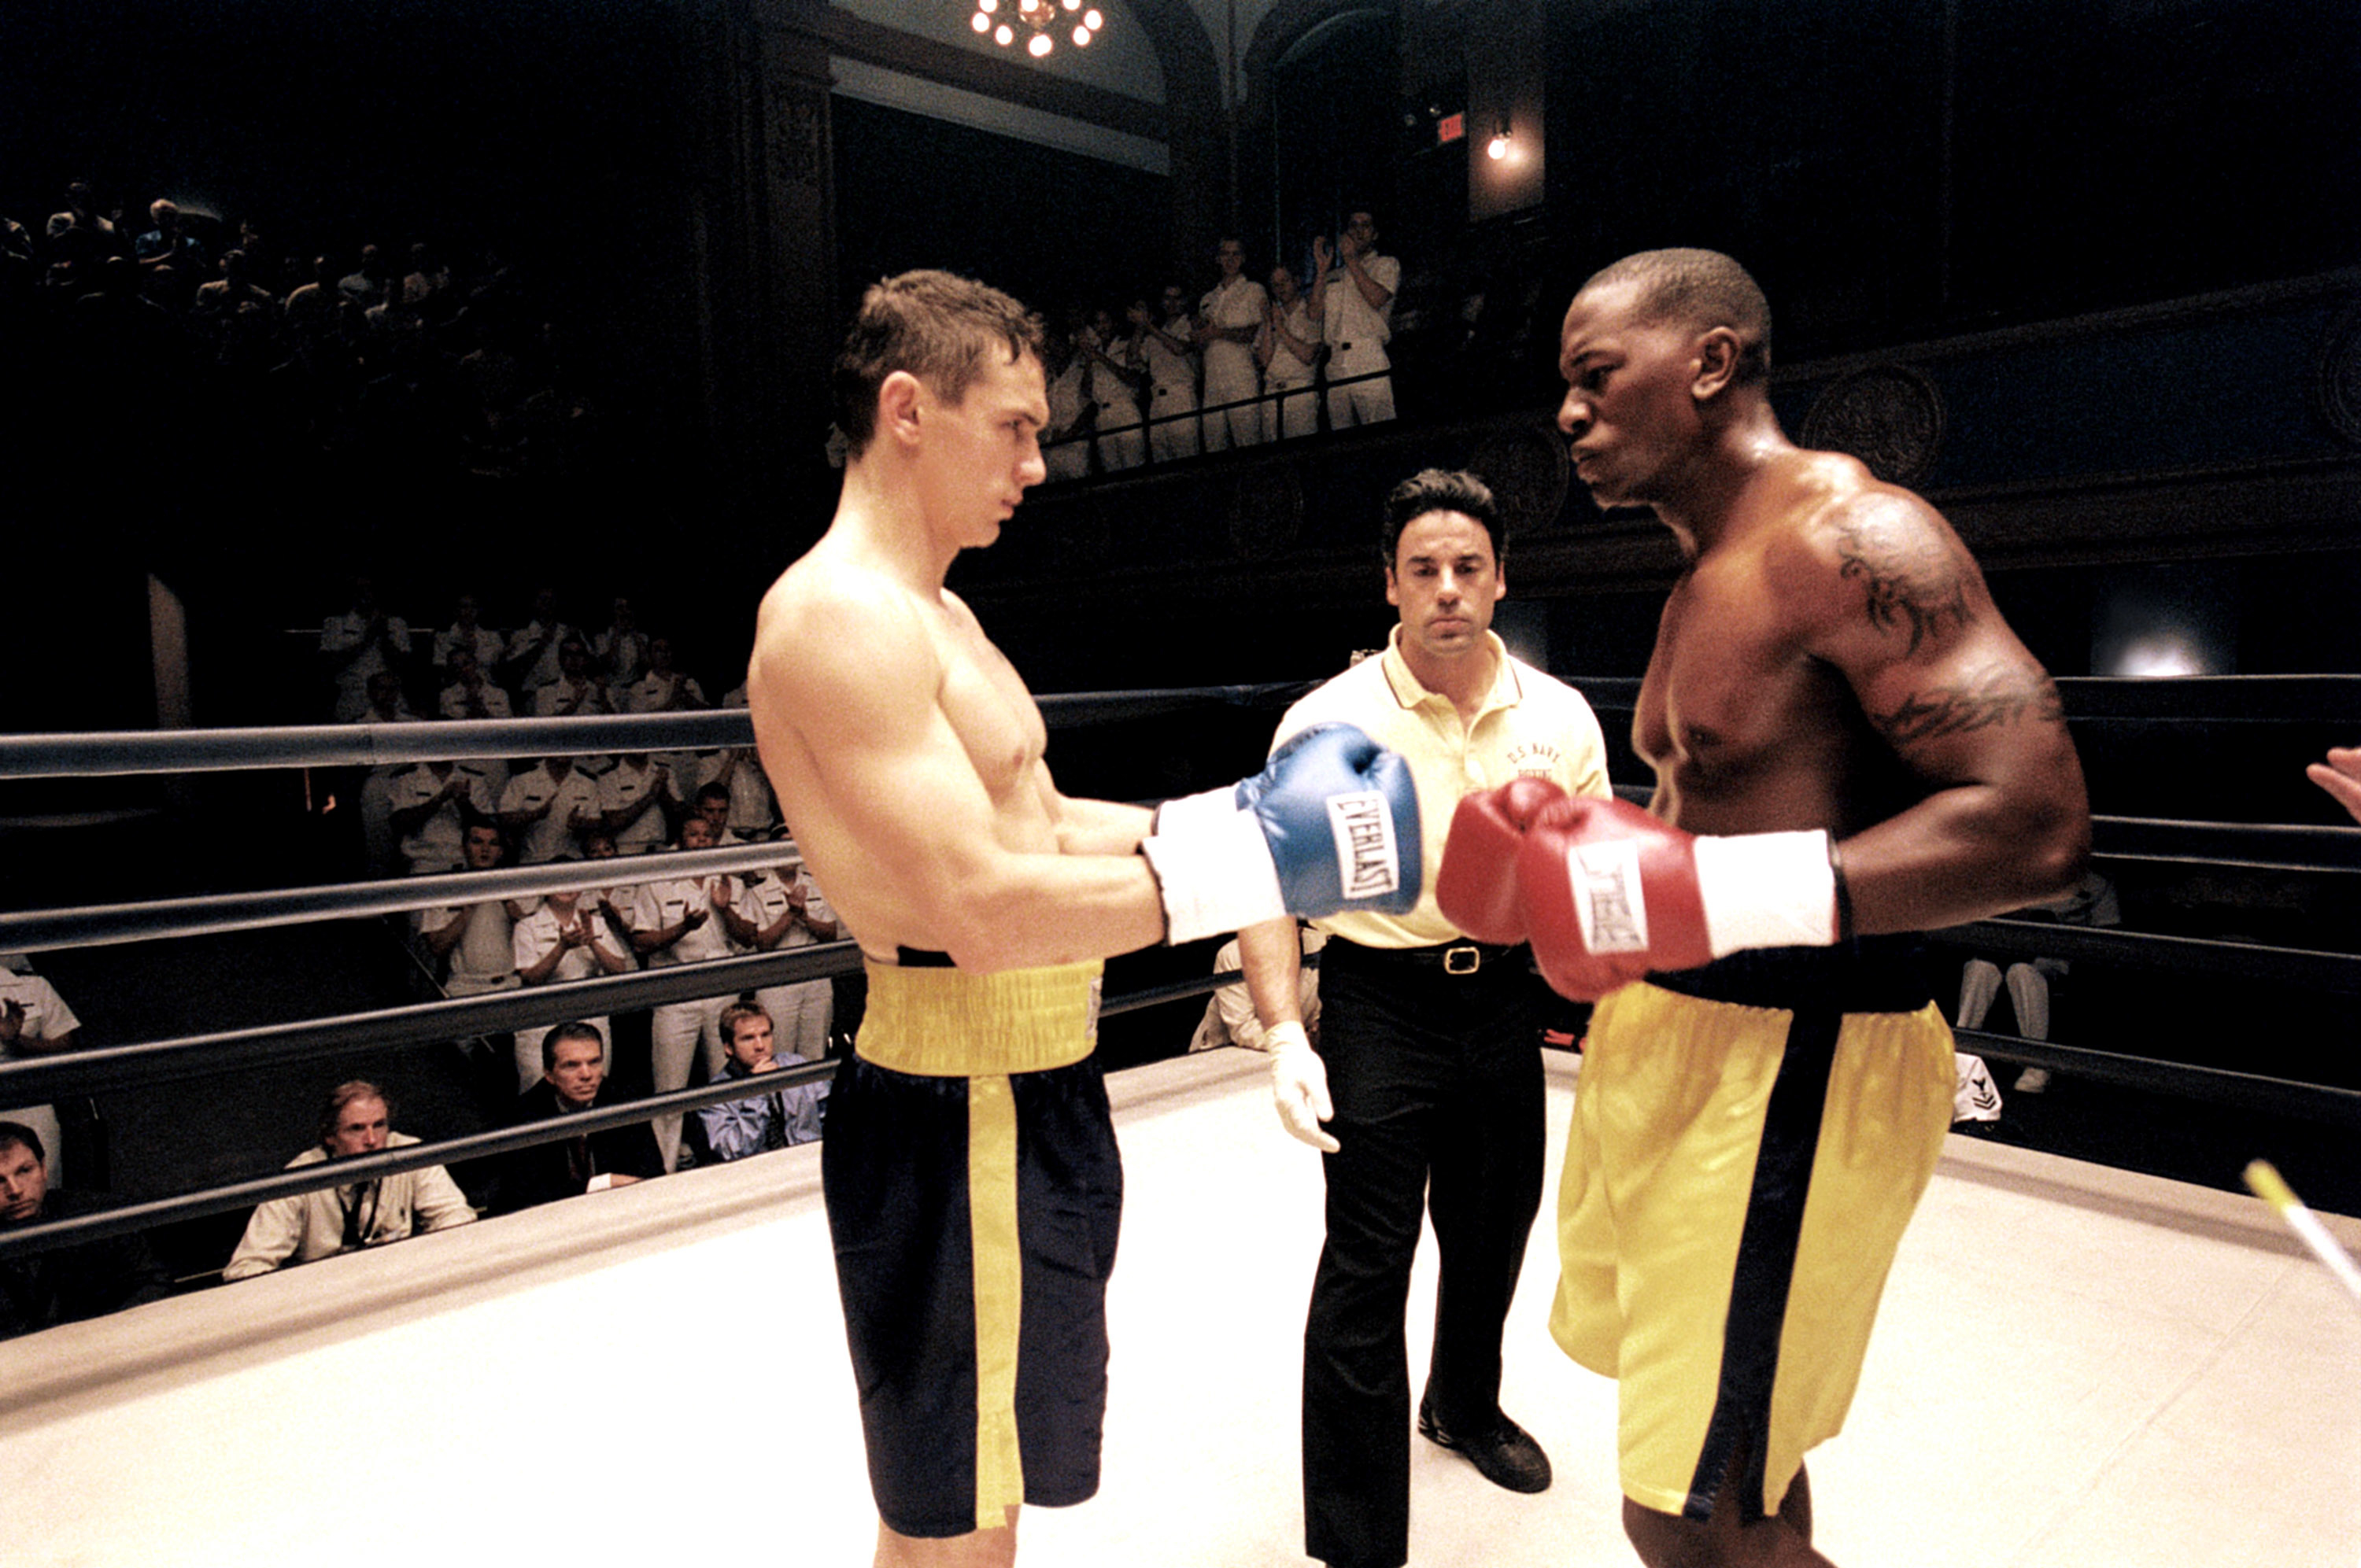 James and Tyrese in character as boxers face off in a ring with a referee between them, audience in the background